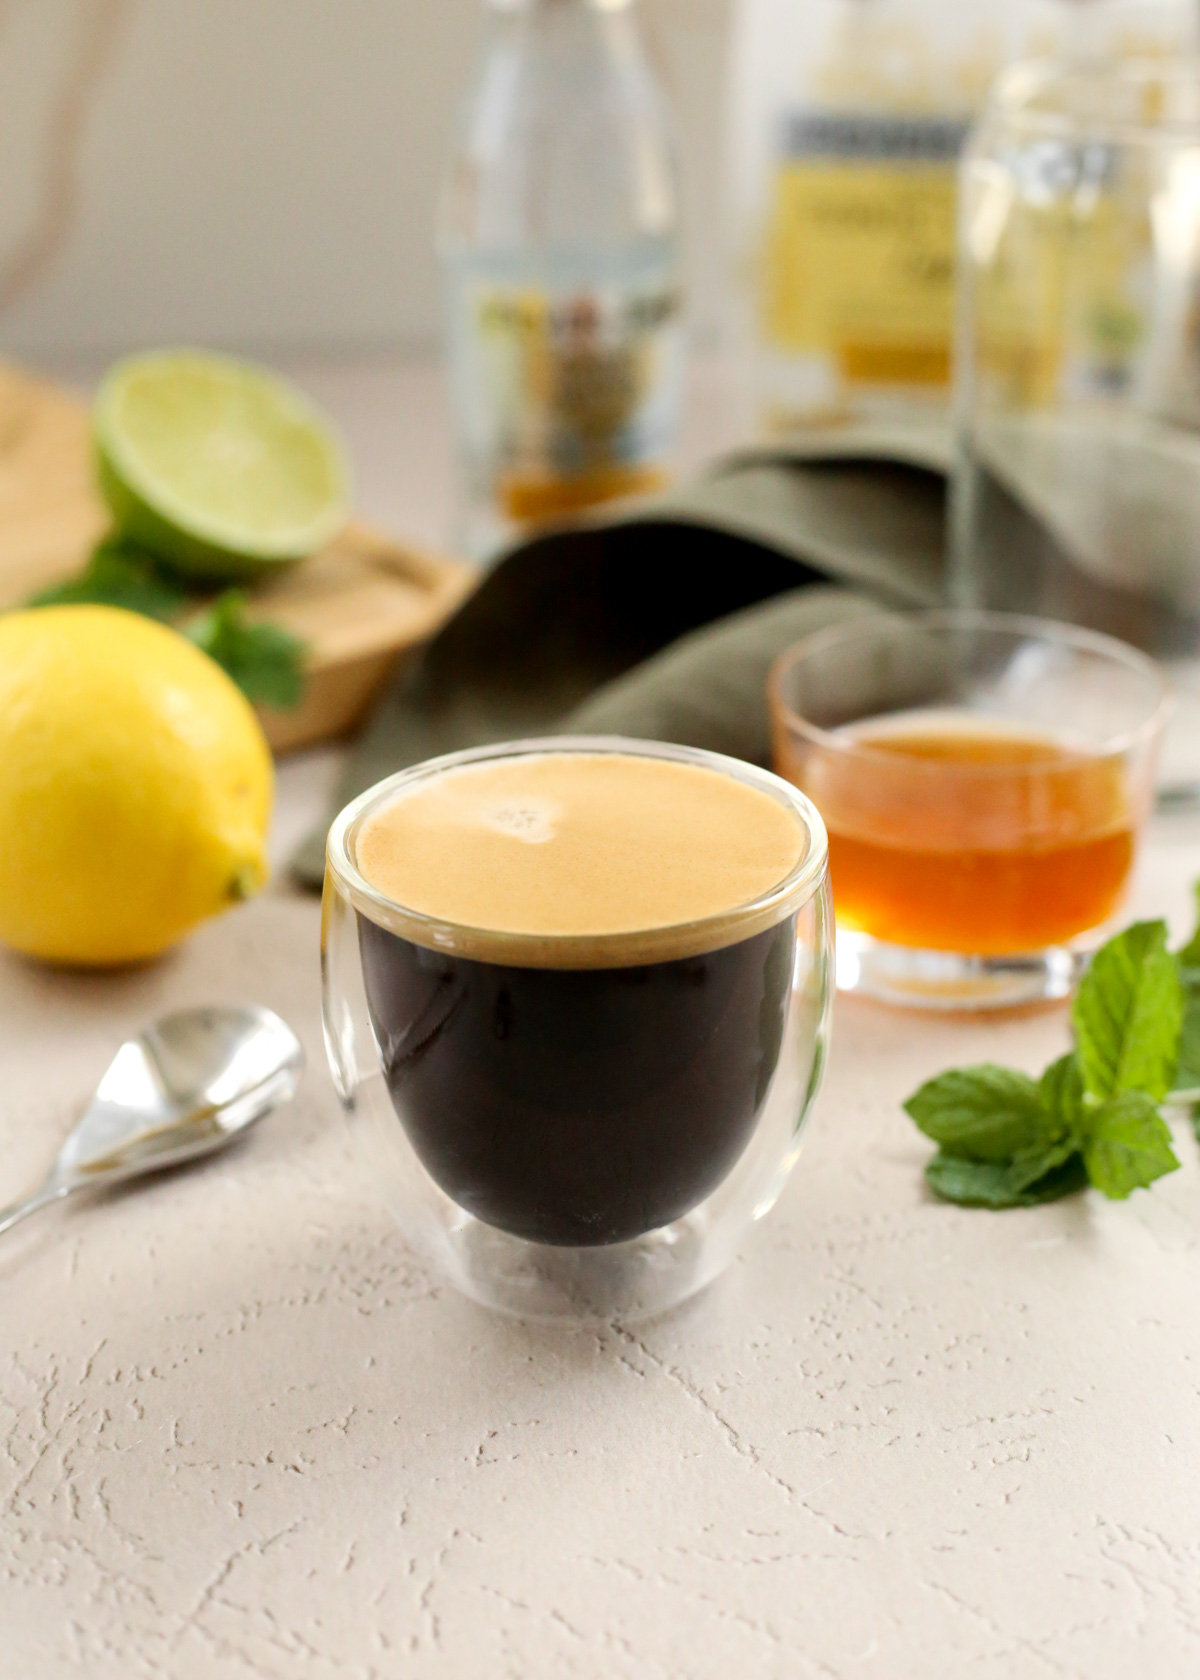 A double shot of espresso in a double walled espresso glass sits on a kitchen countertop with citrus fruits, a small ramekin of yuzu puree, and various bottles of tonic water in the background